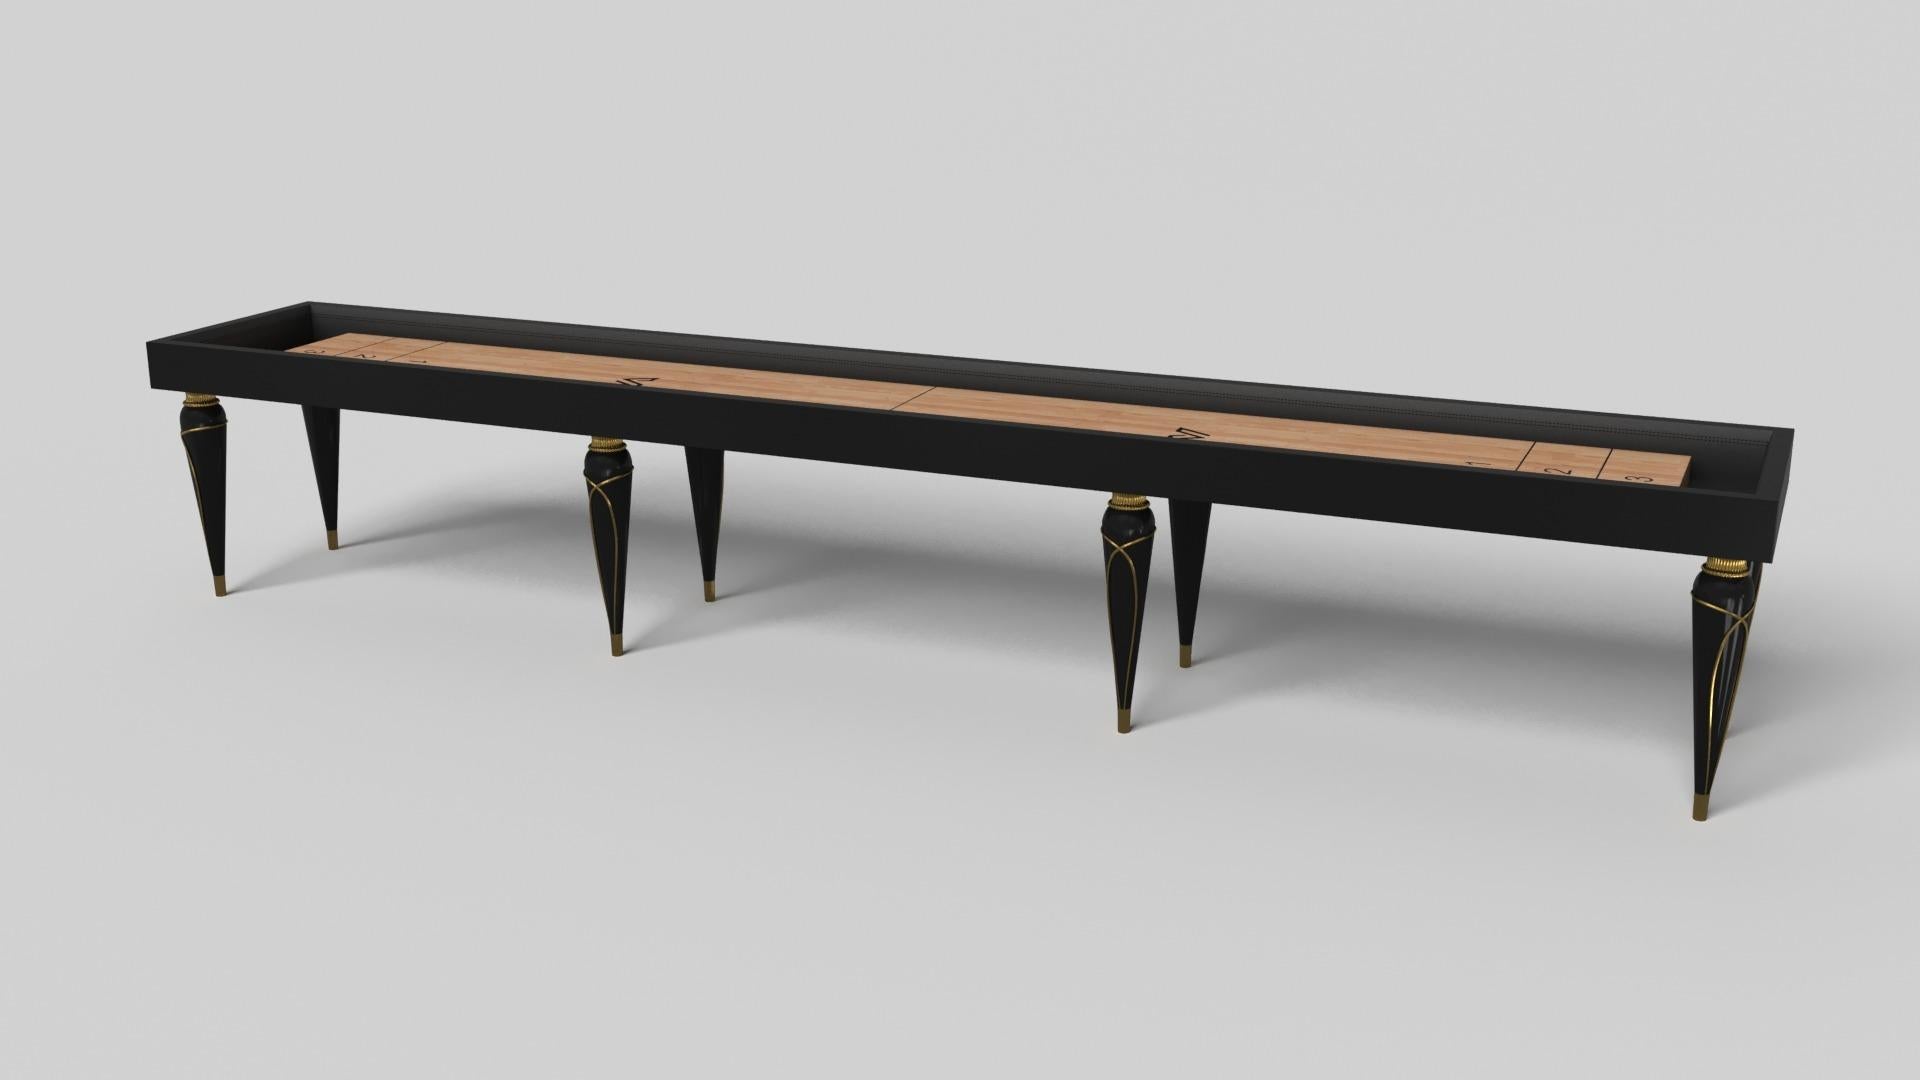 Champagne gold accents add undeniable elegance to this luxury shuffleboard table. Offering superior playability and uncompromised style, this design features hand carved details, decorative metal elements, and metal sabots at the bottom of each leg.